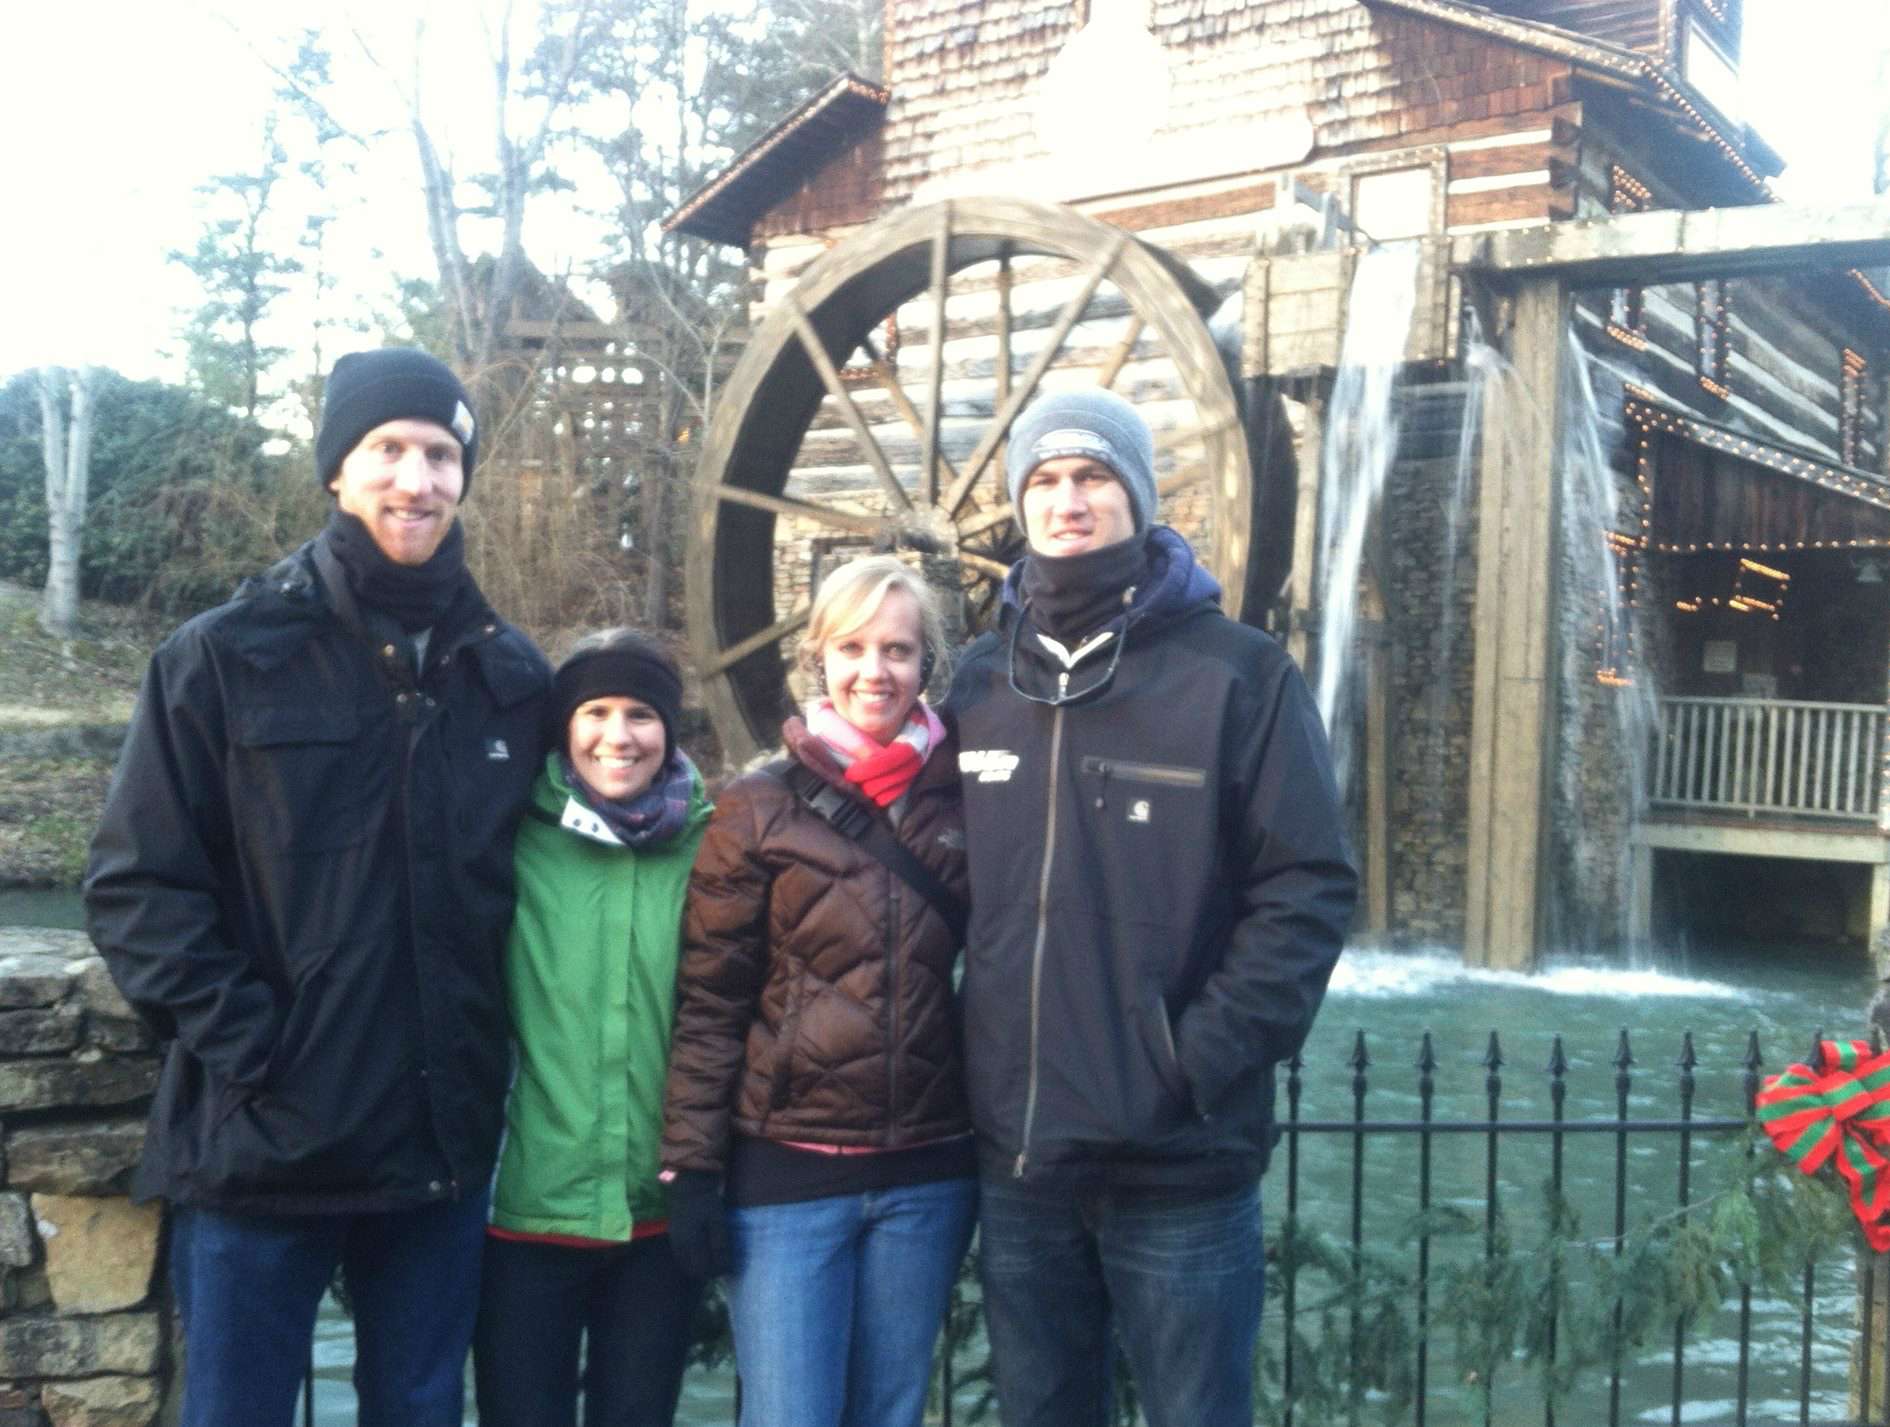 Brandon Card spends a chilly day at Dollywood in foothills of the Great Smoky Mountains.